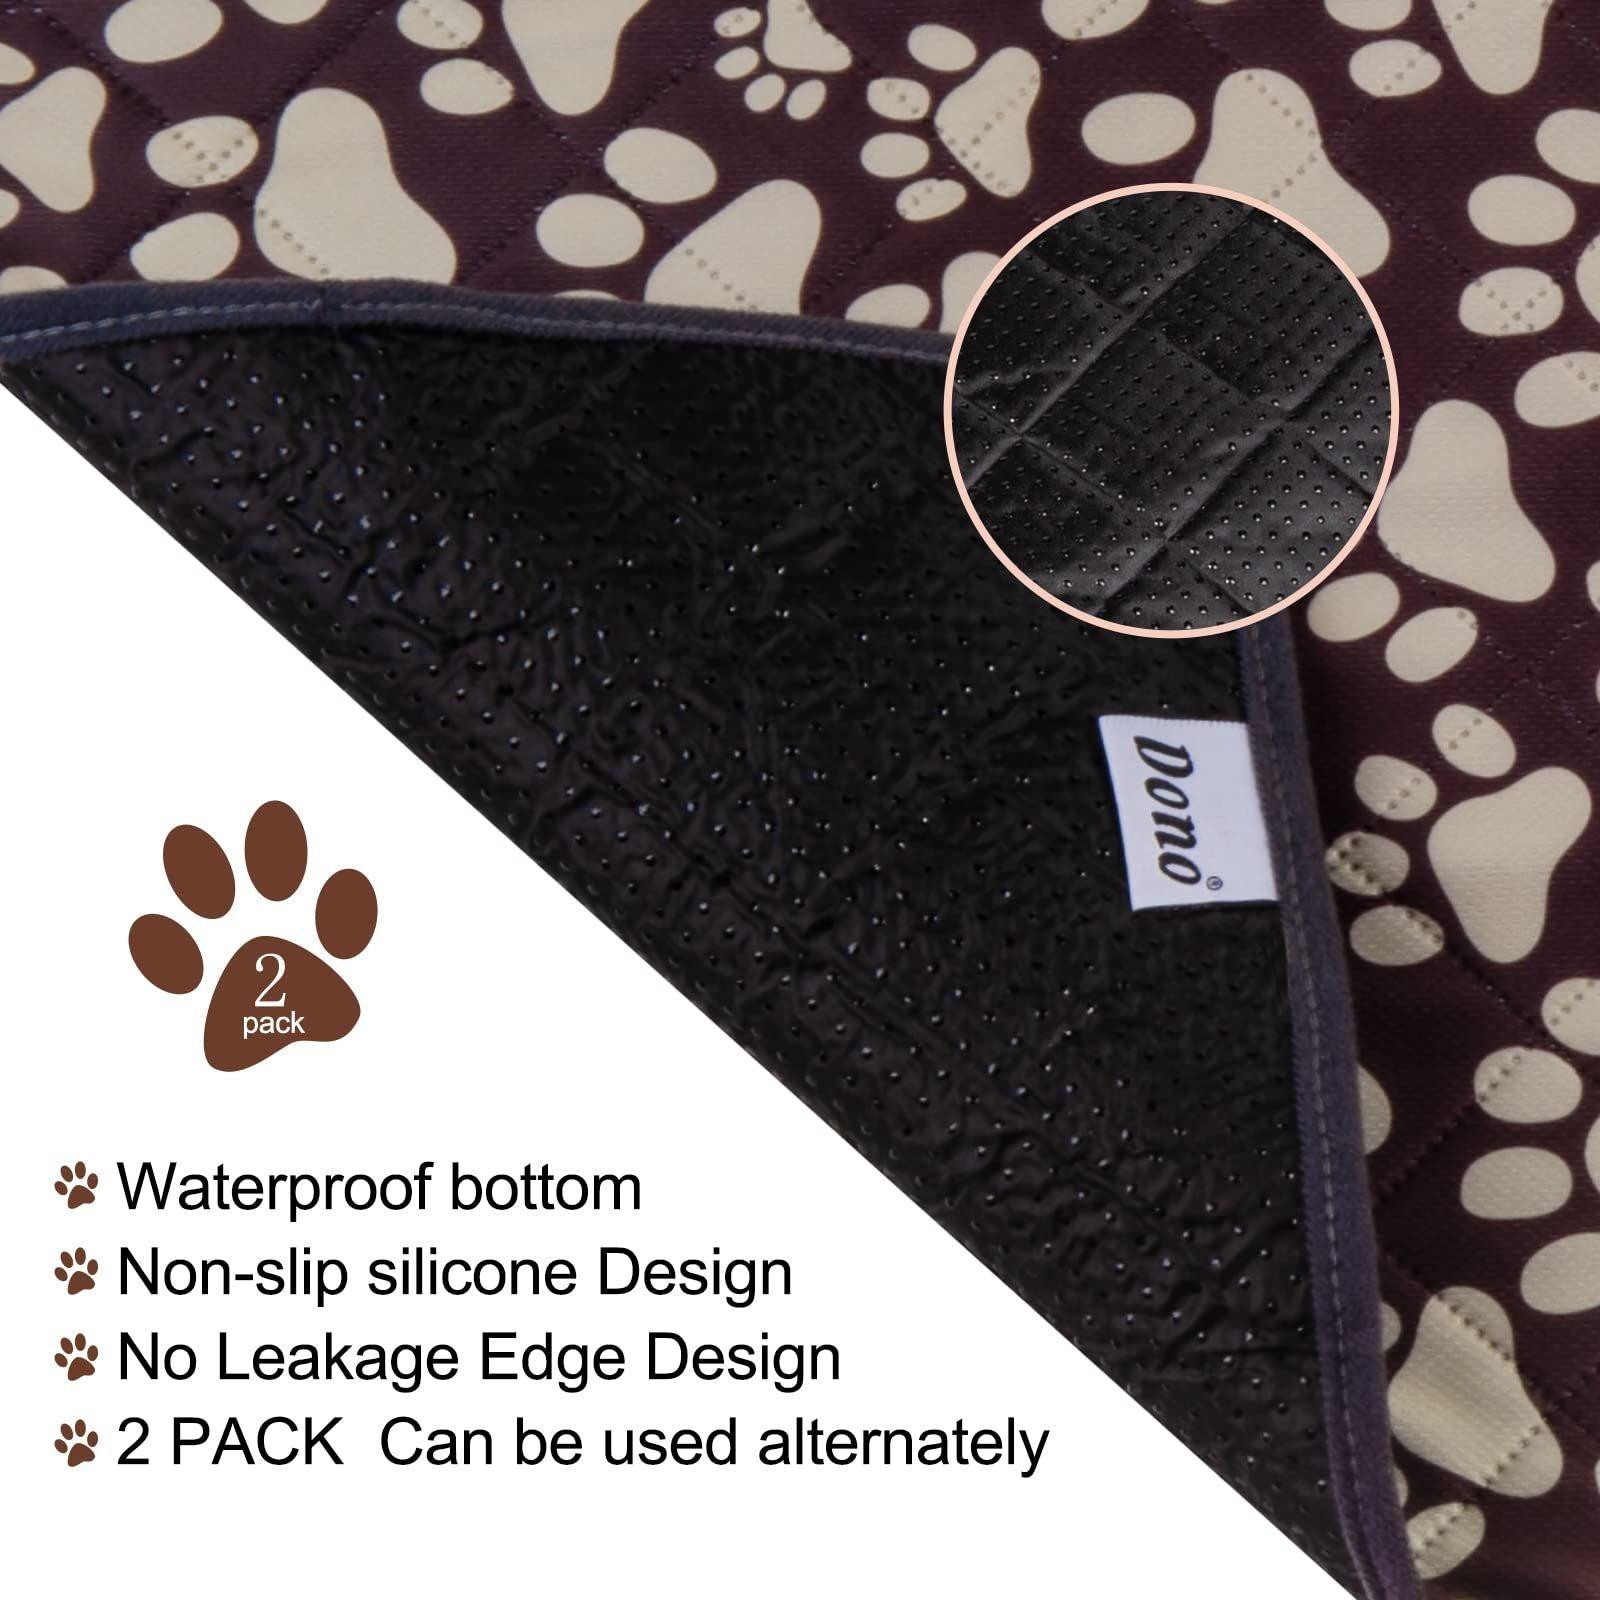 Dono Dog Training Pads Washable, 2 Pack Reusable Puppy Pads Large Medium Small, Waterproof Pet Whelping Incontinence Pee Pads,Upgrade Fast Absorbent non slip Mat for Indoor/Outdoor/Car/Travel 1